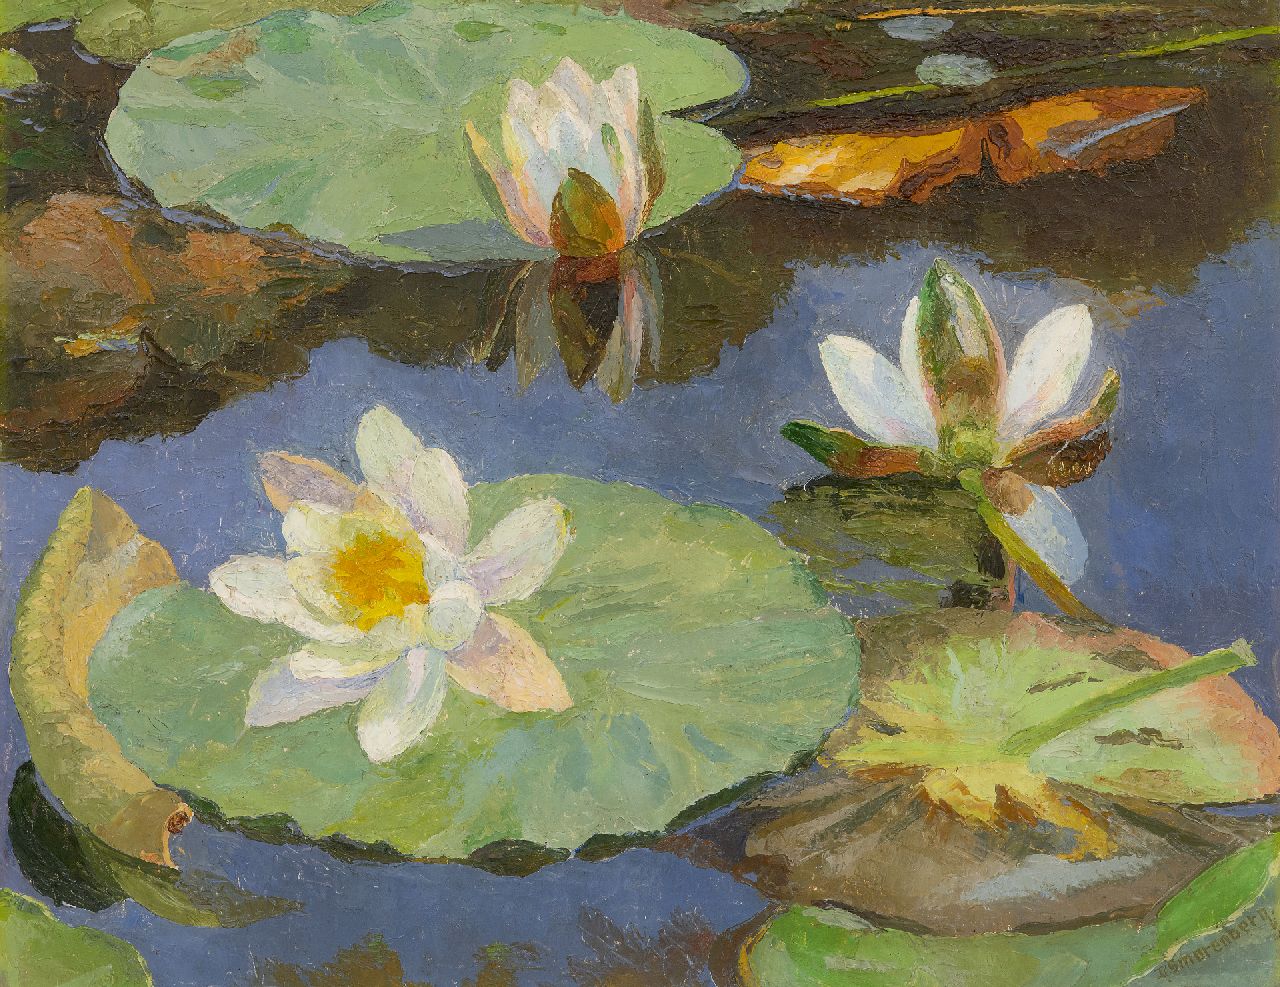 Smorenberg D.  | Dirk Smorenberg | Paintings offered for sale | Waterlilies, oil on canvas 41.2 x 53.3 cm, signed l.r.